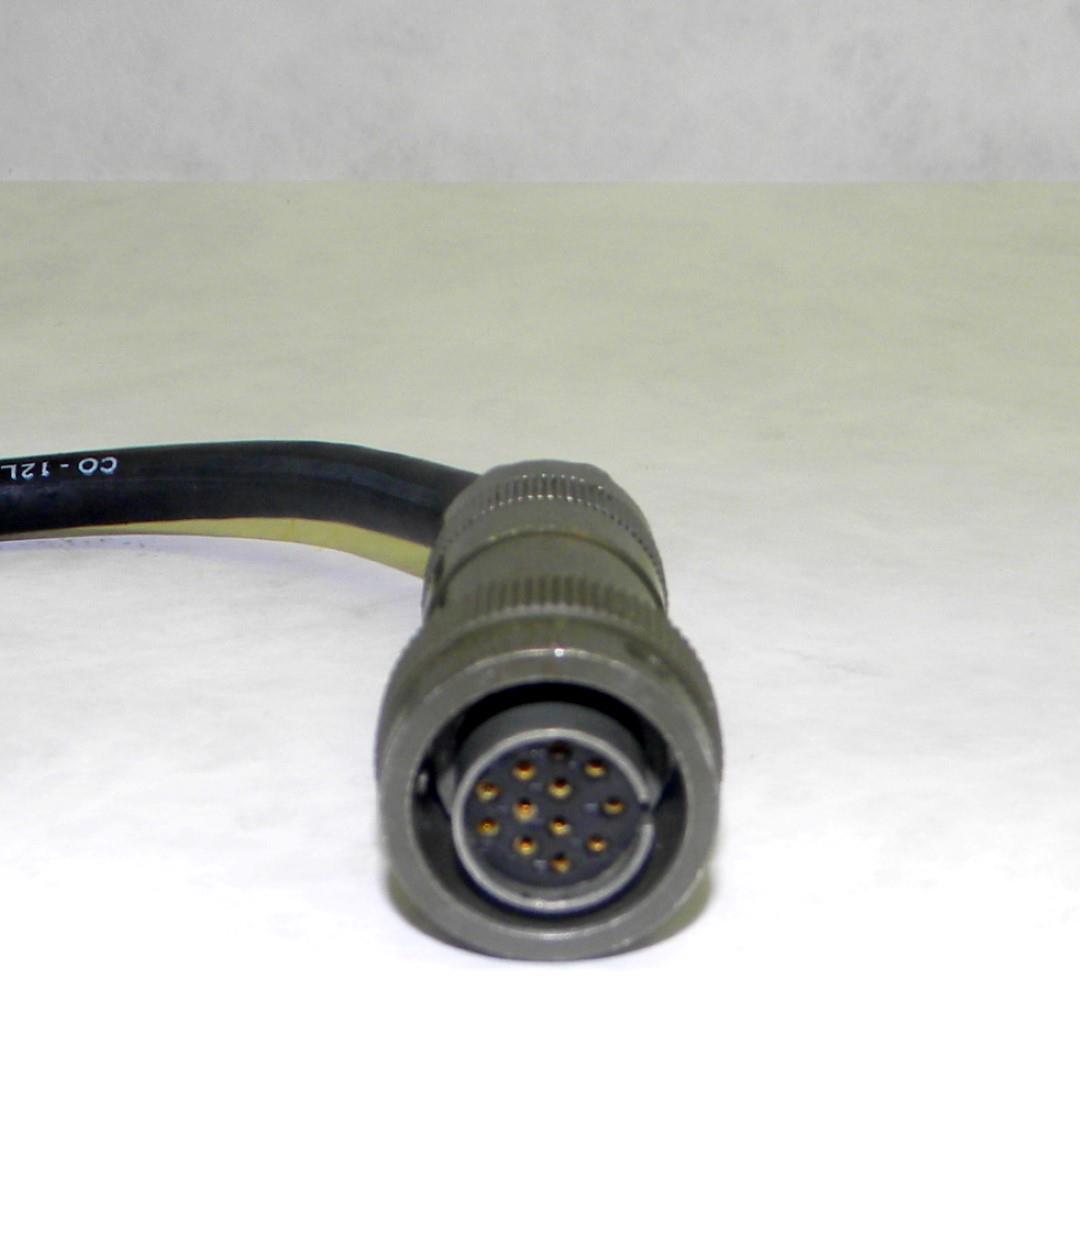 RAD-241 | 5995-00-258-8423 Cable Assembly, 6 Feet Long for Radio Set and Receiver Transmitter Radio. NOS (5).JPG